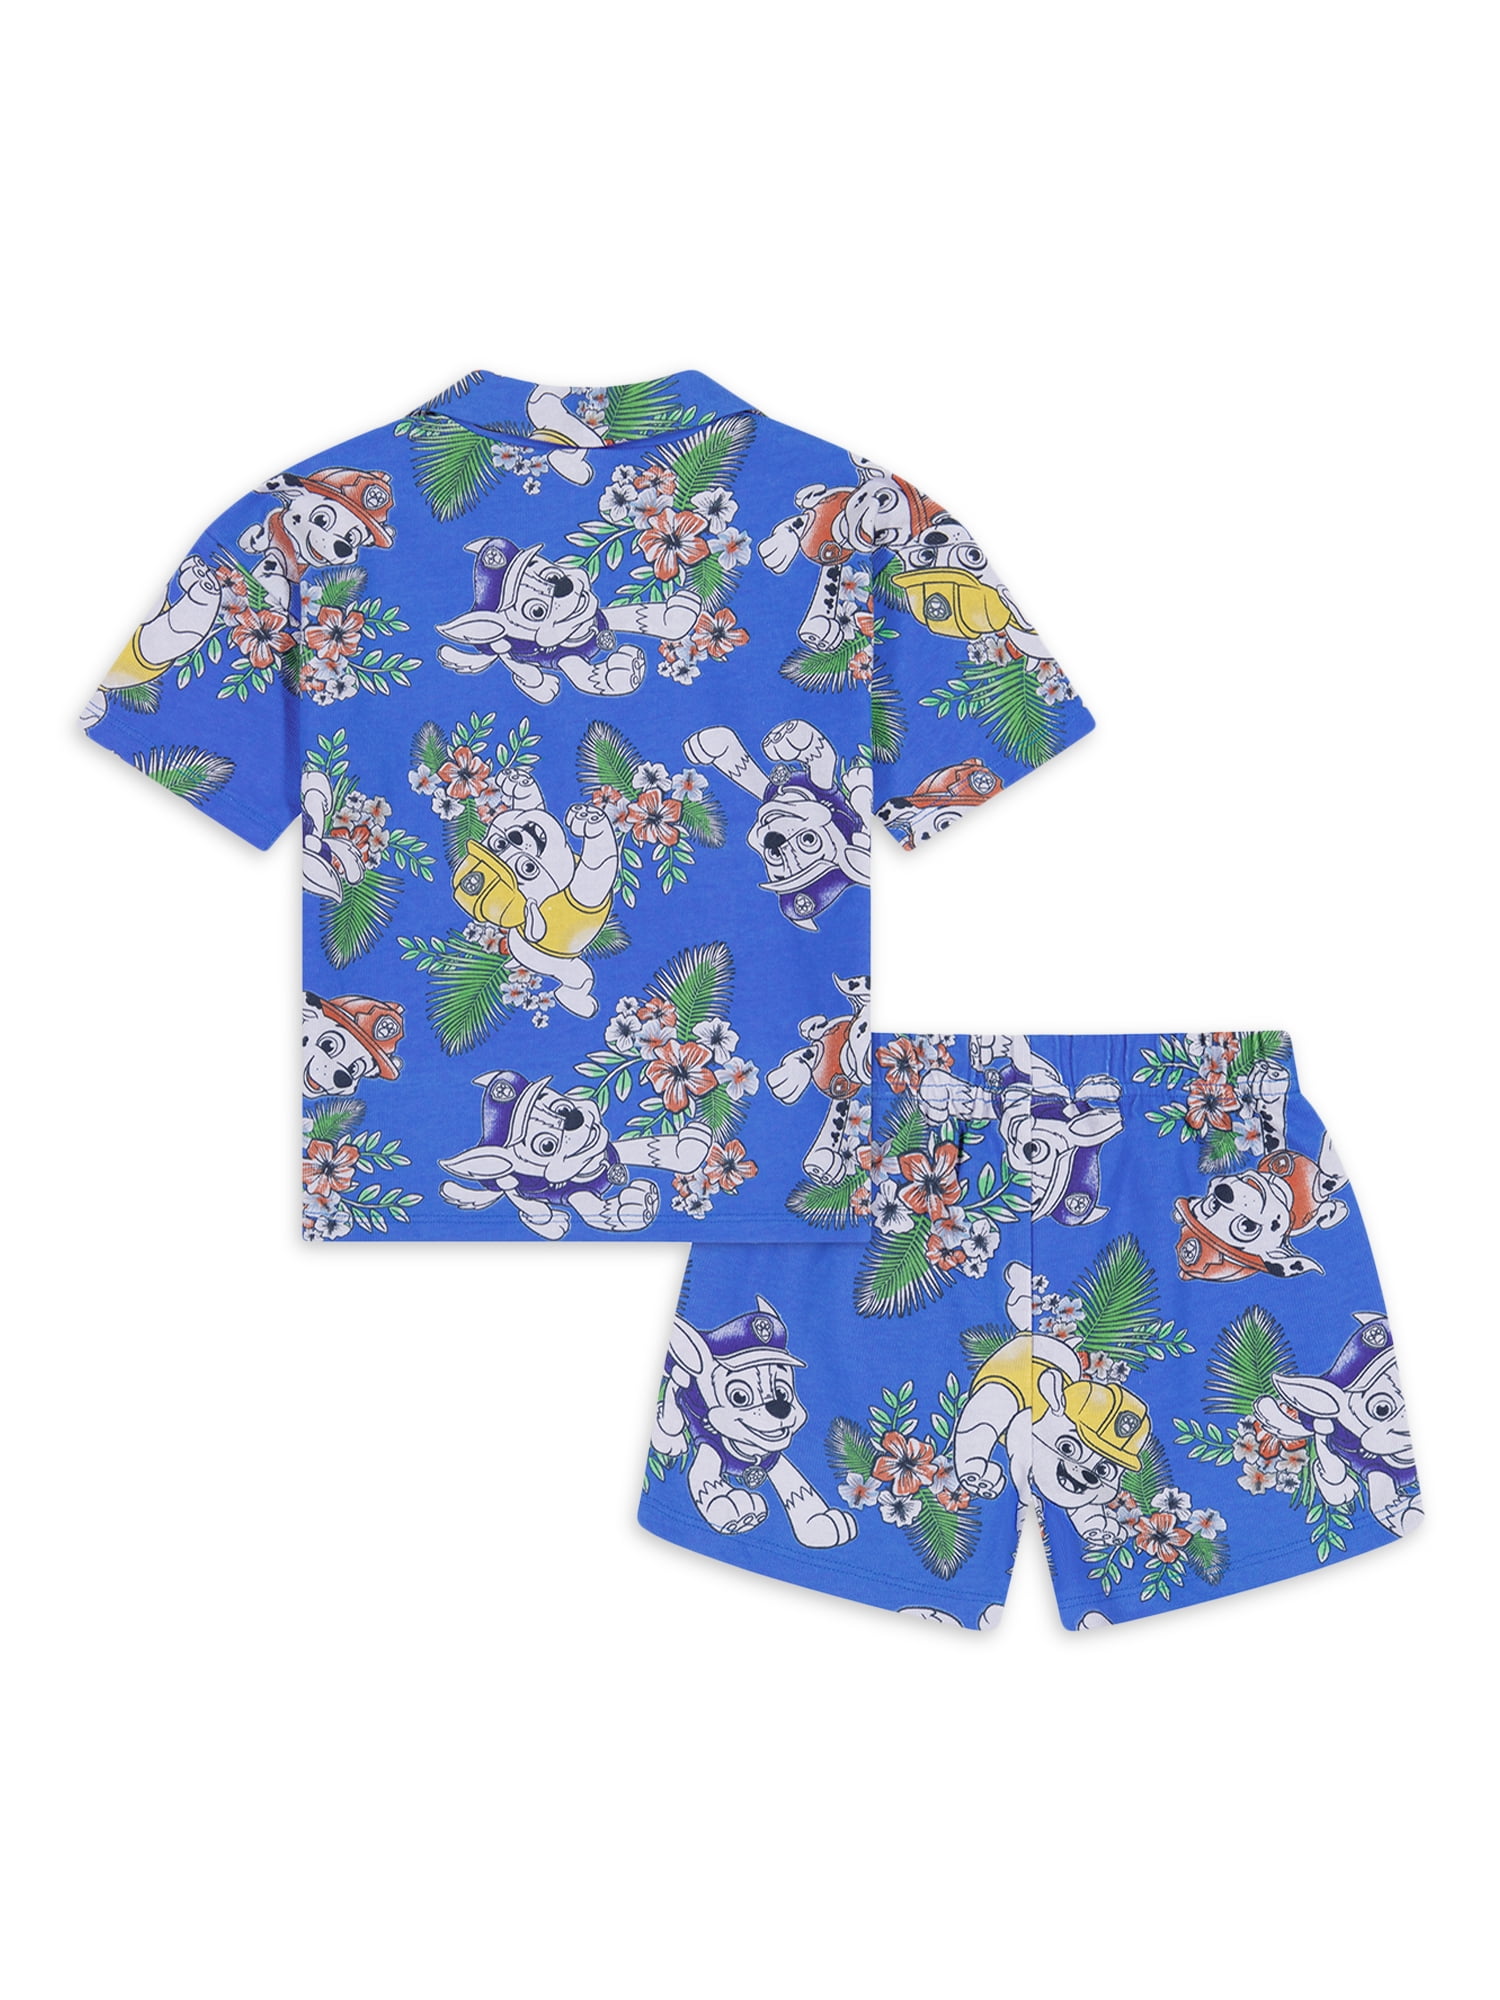 PAW Patrol 2-piece Toddler Boy Puppy Love Tee and Allover Shorts Set